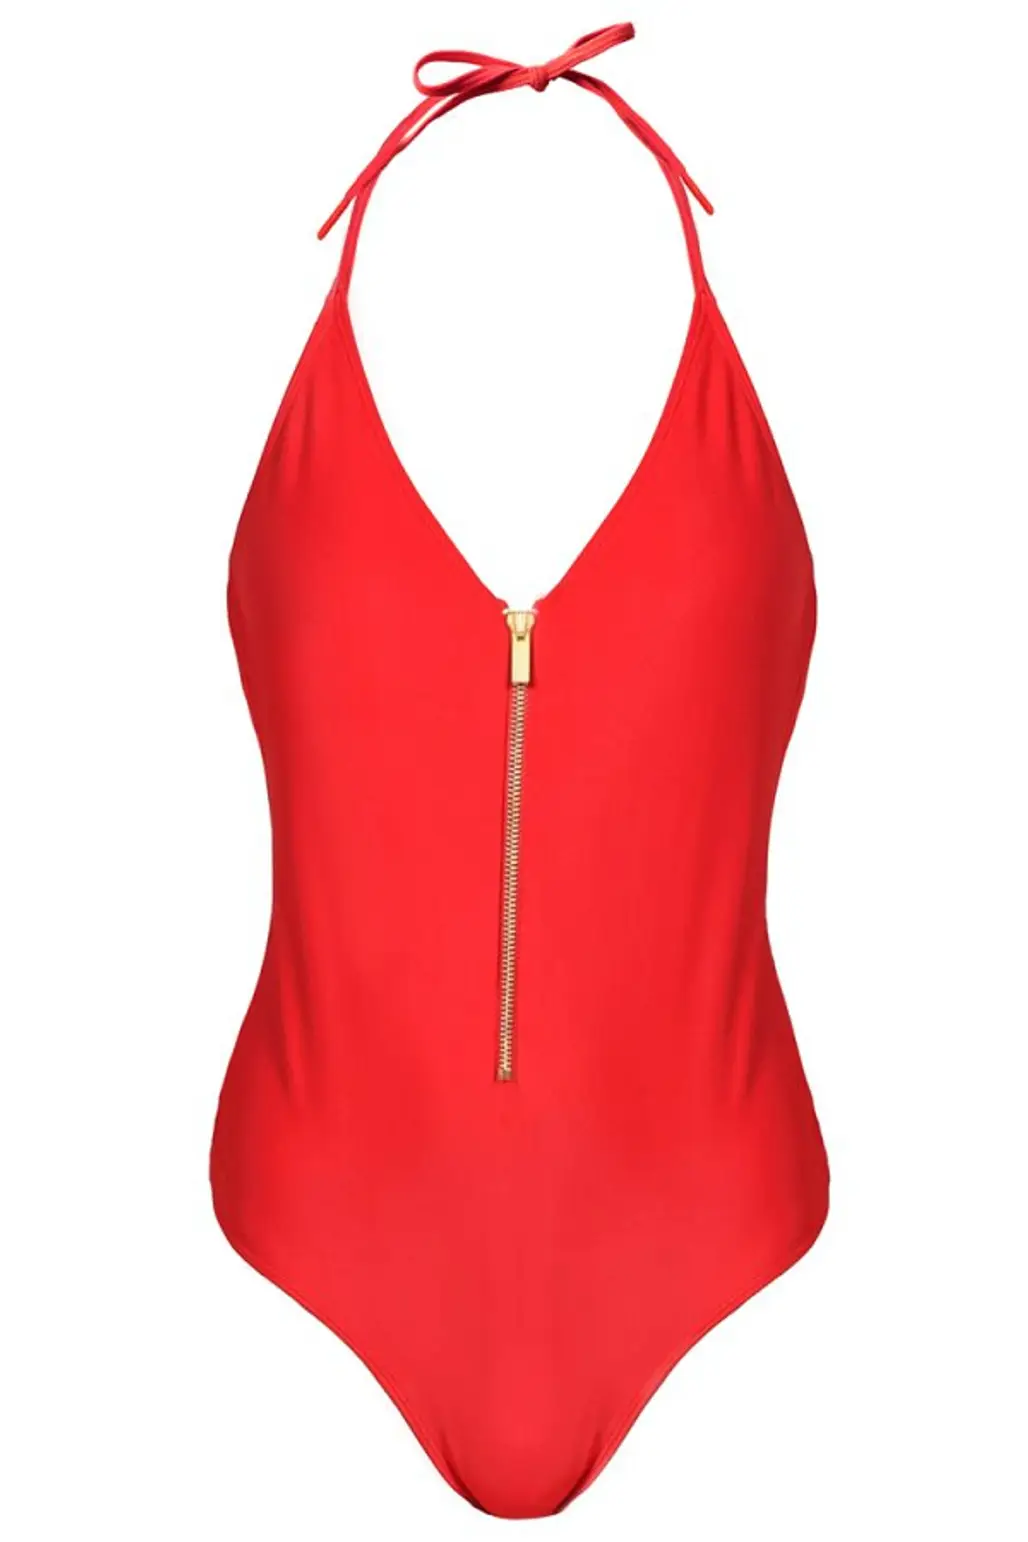 clothing, swimwear, one piece swimsuit, red, pink,